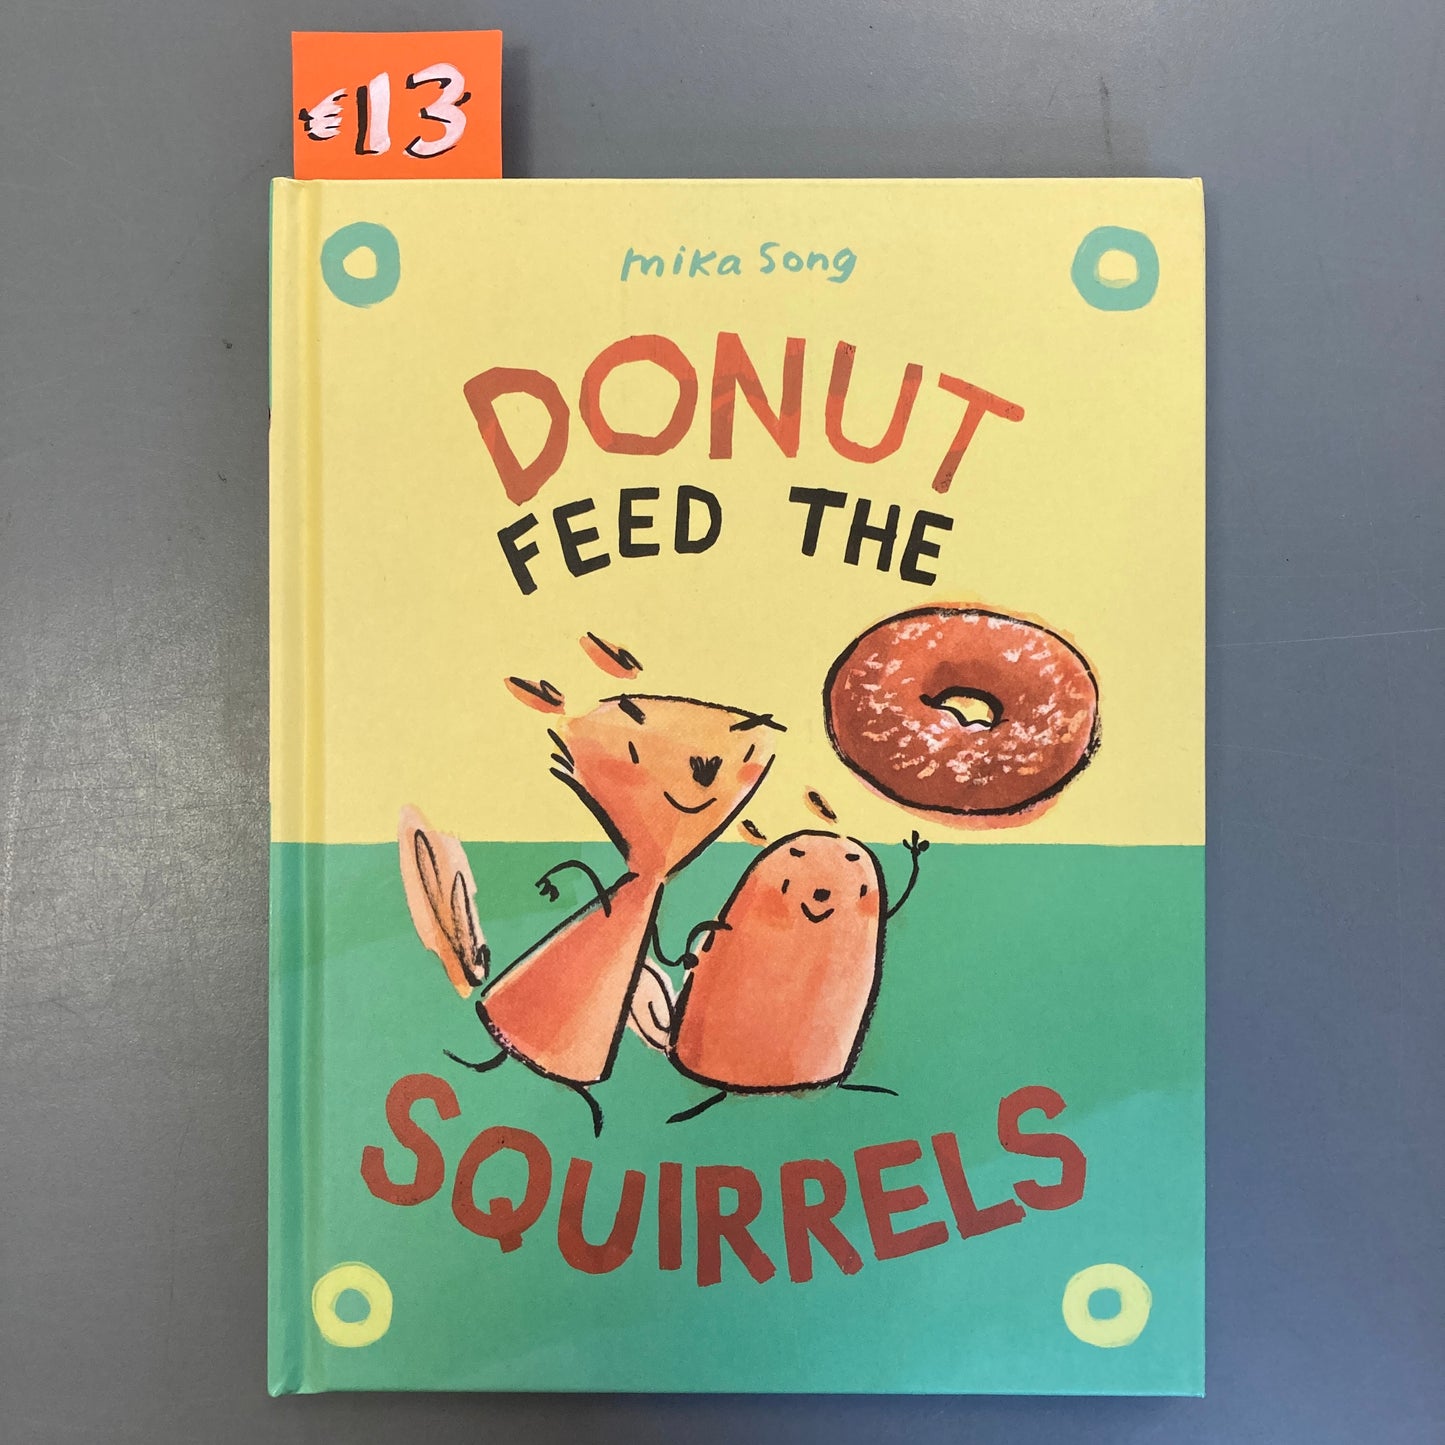 Donut Feed The Squirrels